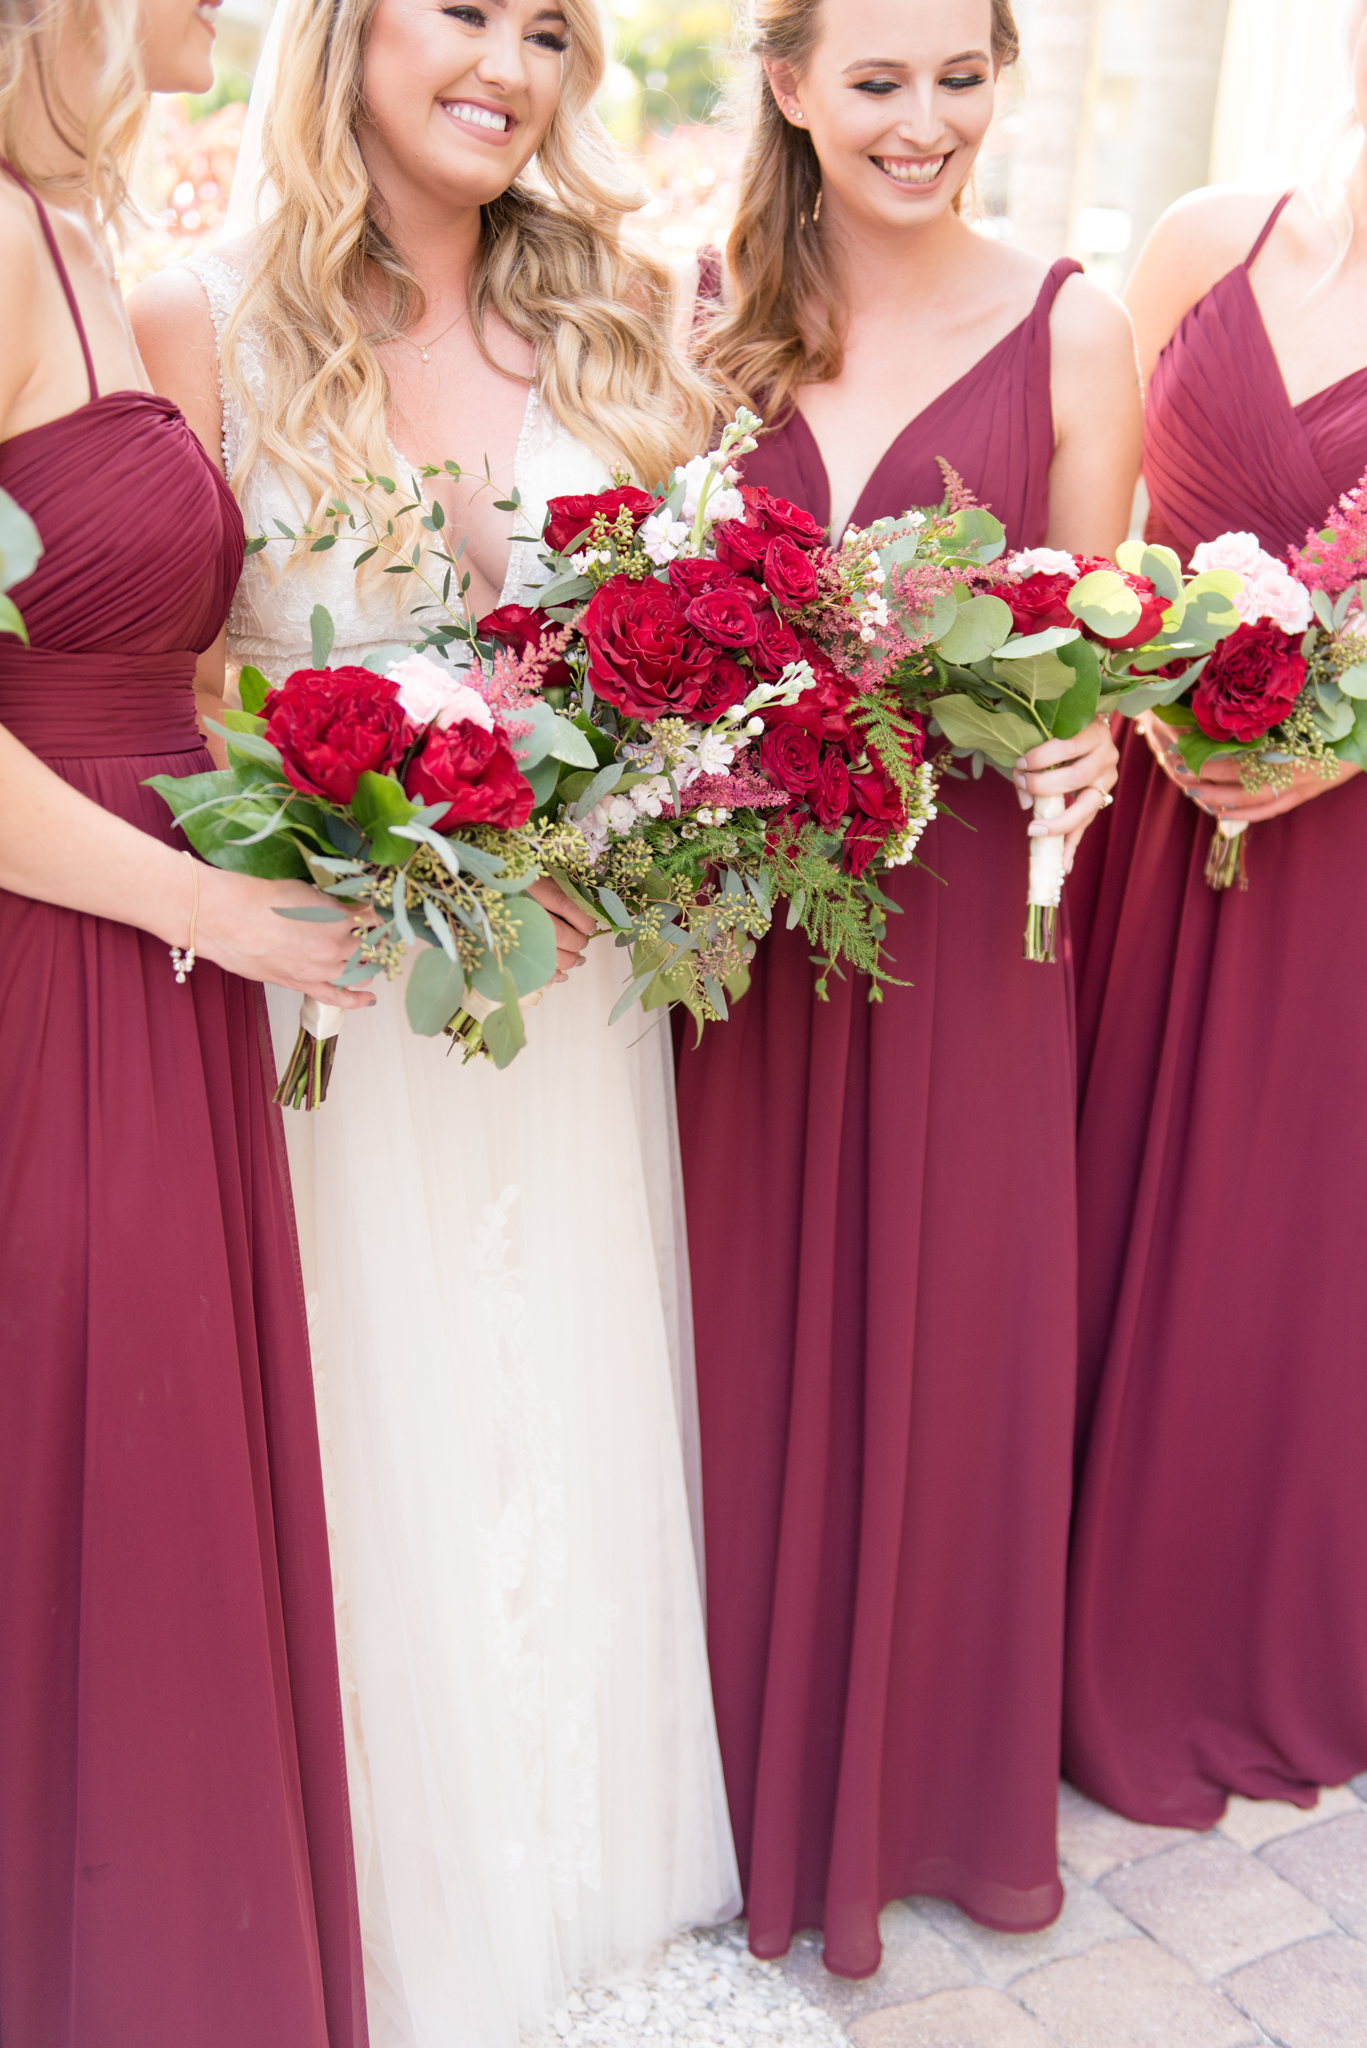 Bride and bridesmaids hold flowers.